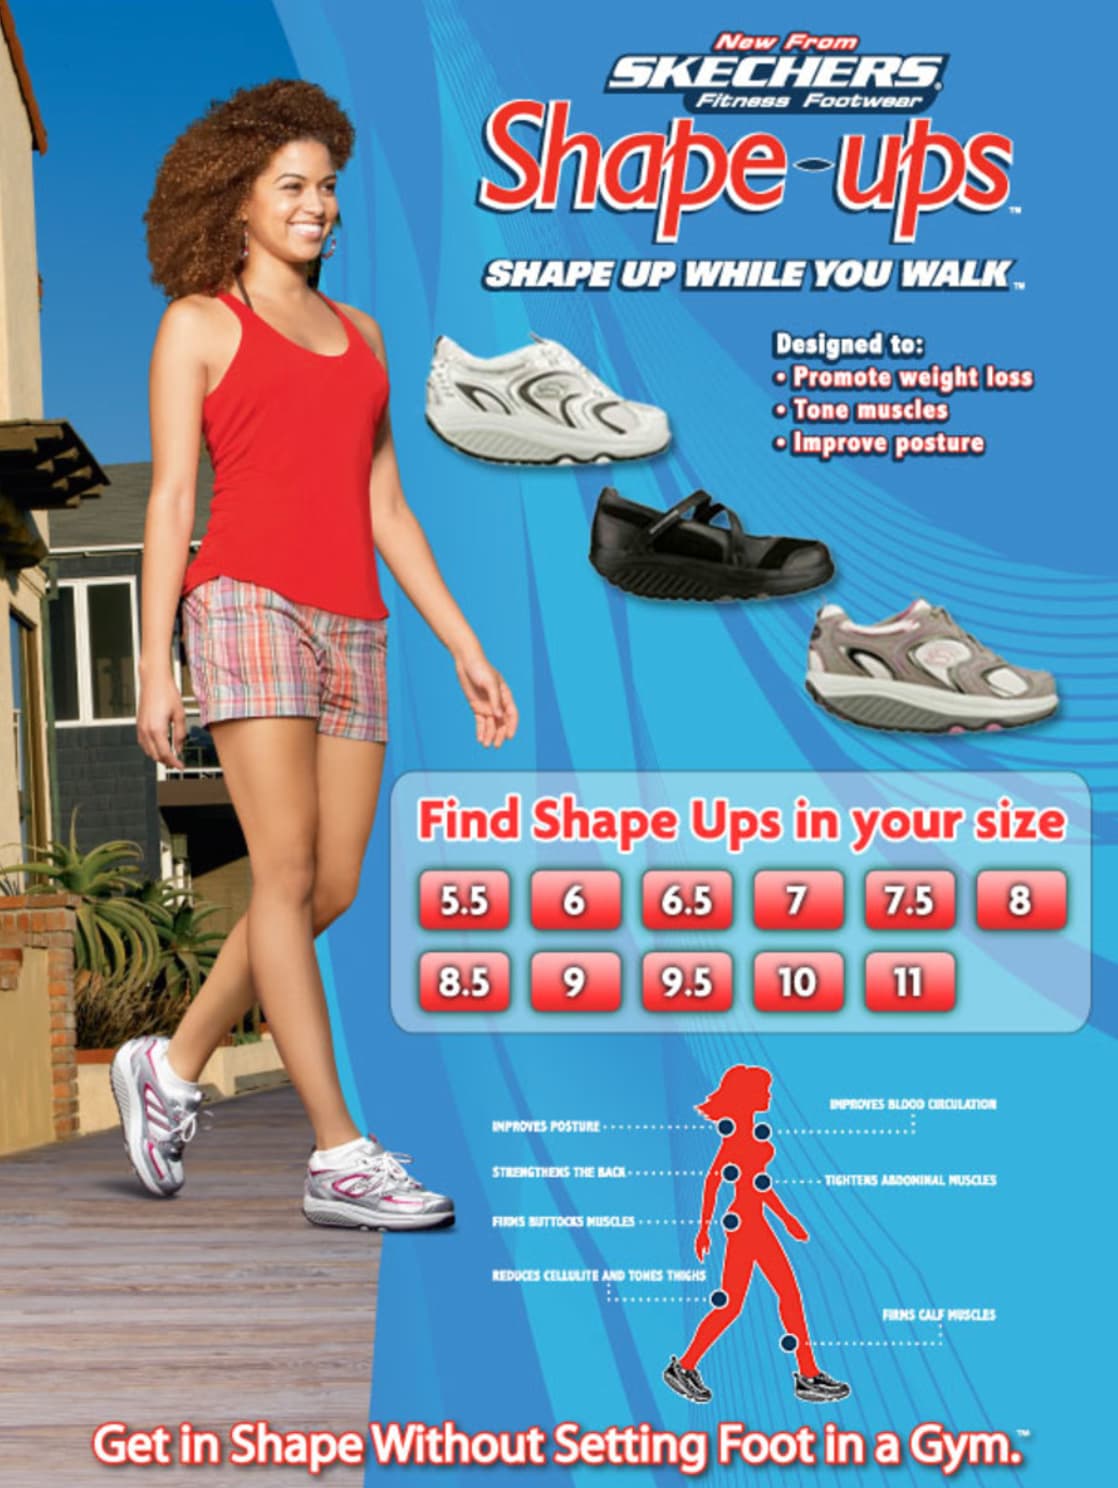 poster - New From Skechers Fitness Footwear Shapeups Shape Up While You Walk Designed to Promote weight loss Tone muscles Improve posture Find Shape Ups in your size 5.5 6 6.5 7 7.5 8 8.5 9 9.5 10 11 Improves Posture Strengthens The Back Fins Buttocks Mus